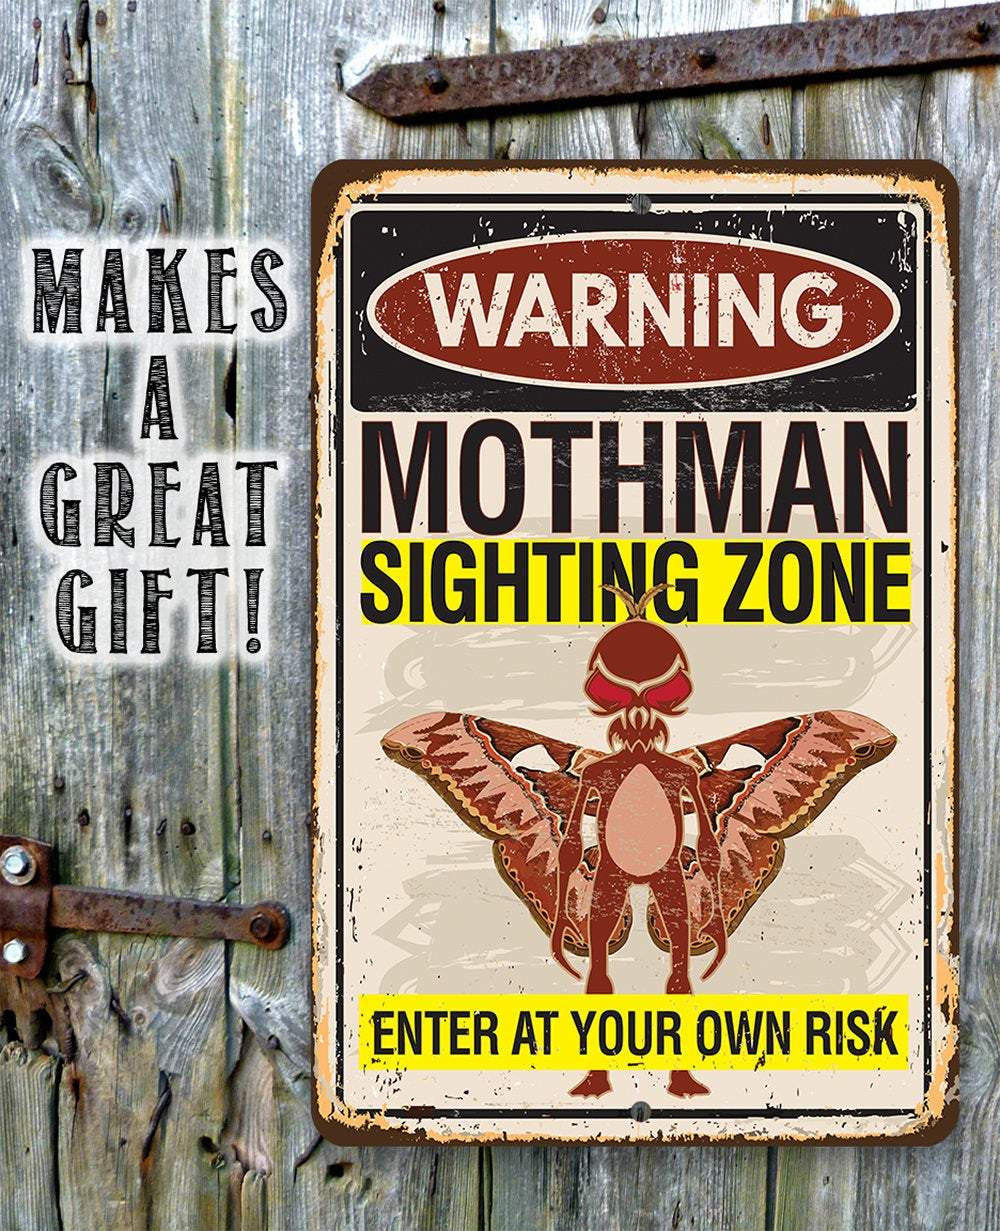 Warning Mothman Sighting Zone Enter at Your Own Risk - Metal Sign | Lone Star Art.